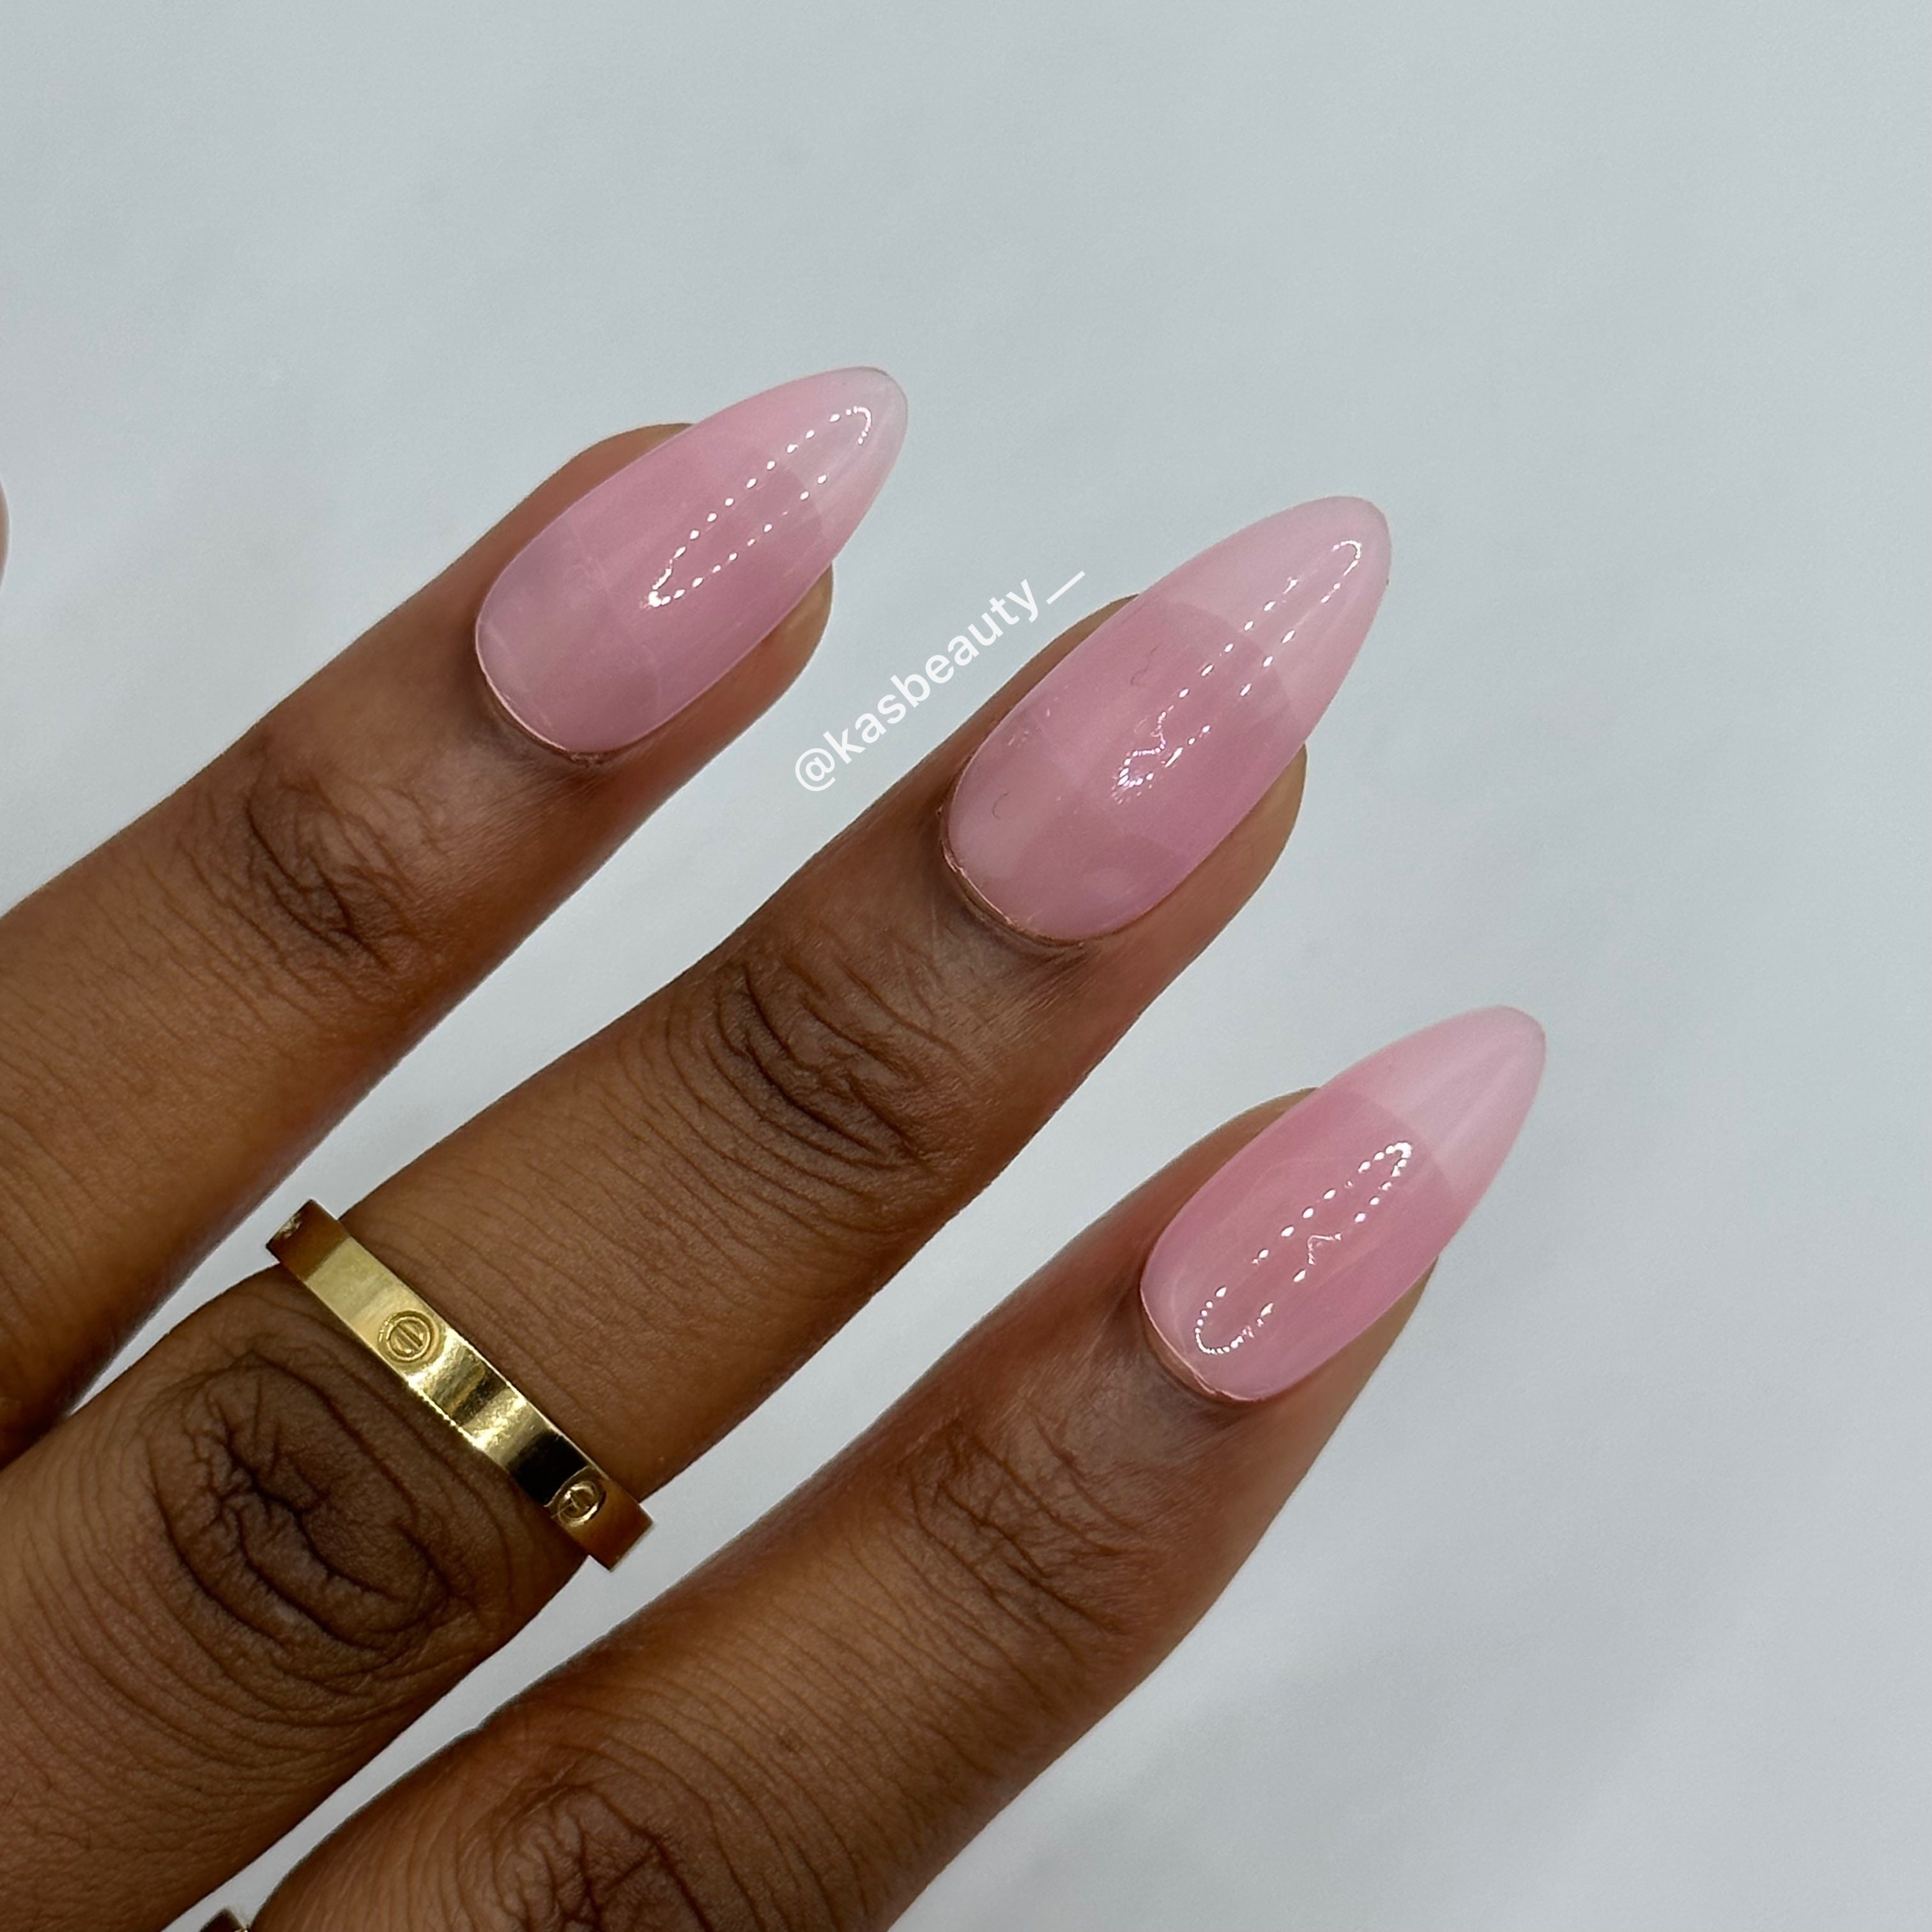 Recommendations needed! Sheer pink polish that doesn't streak (and is a  'your nails but better' type of vibe)? : r/RedditLaqueristas